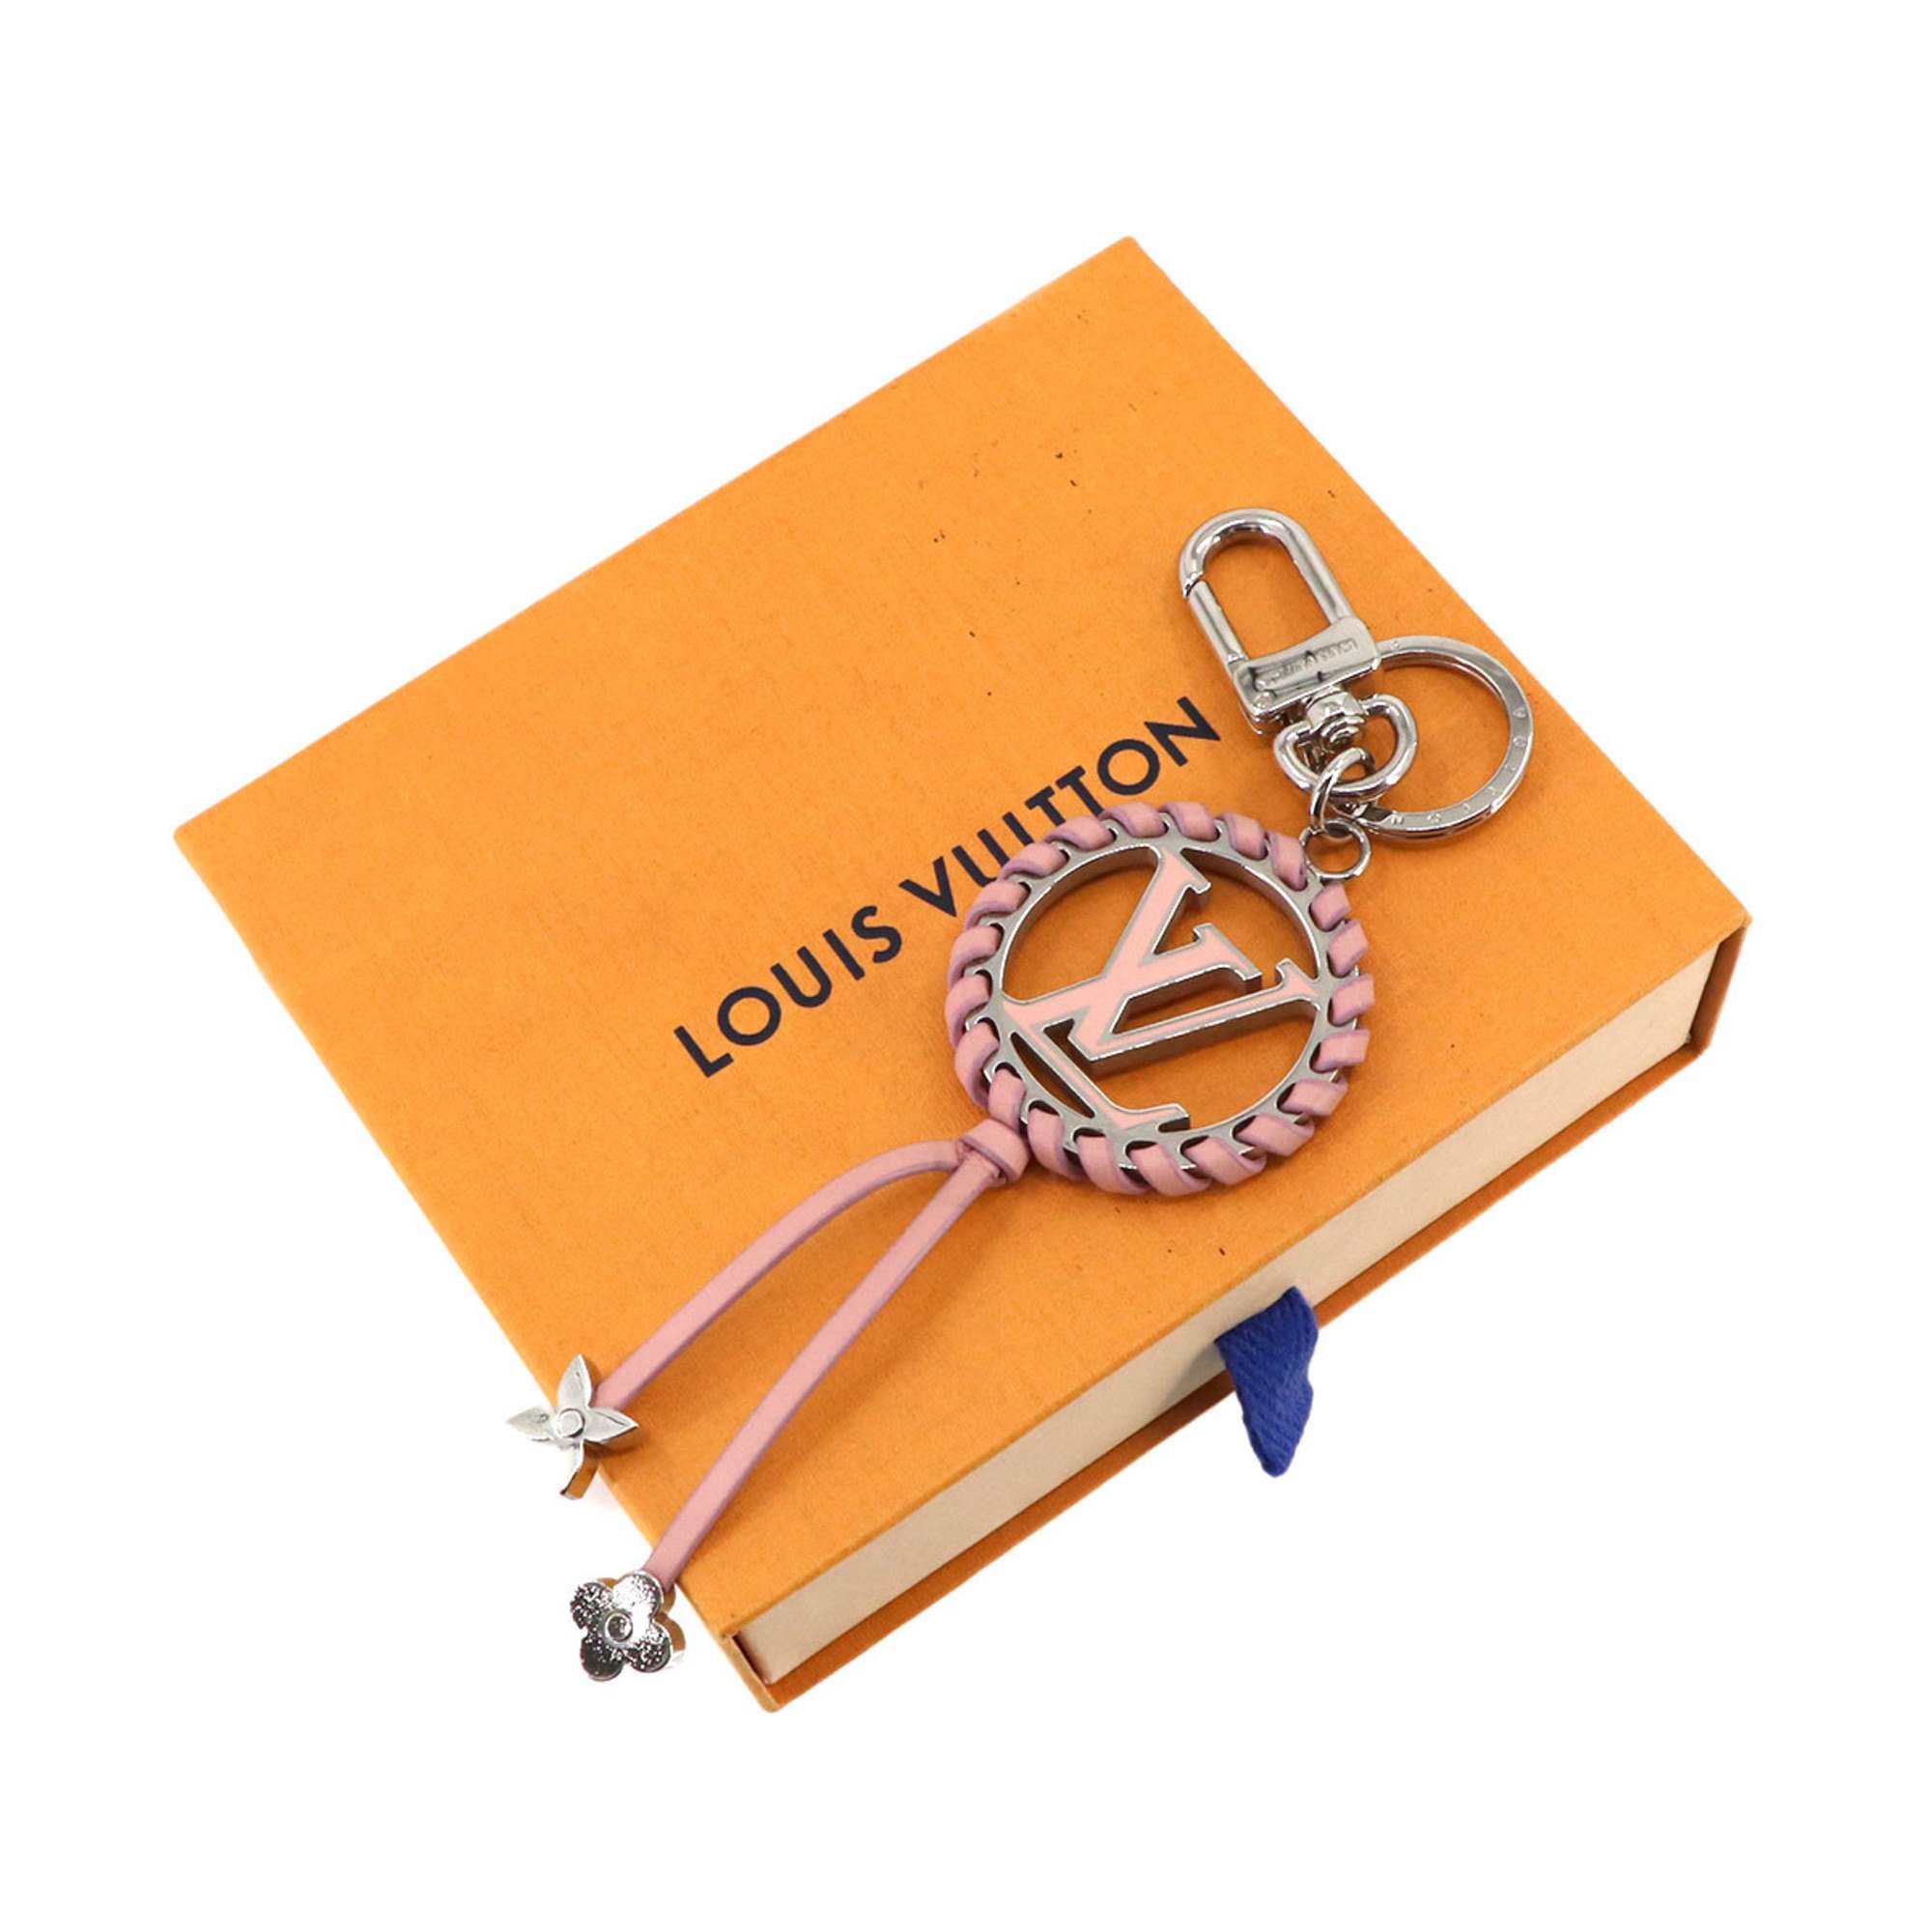 LOUIS VUITTON Very Key Ring Charm Pink M63081 Silver Hardware Bag and Holder